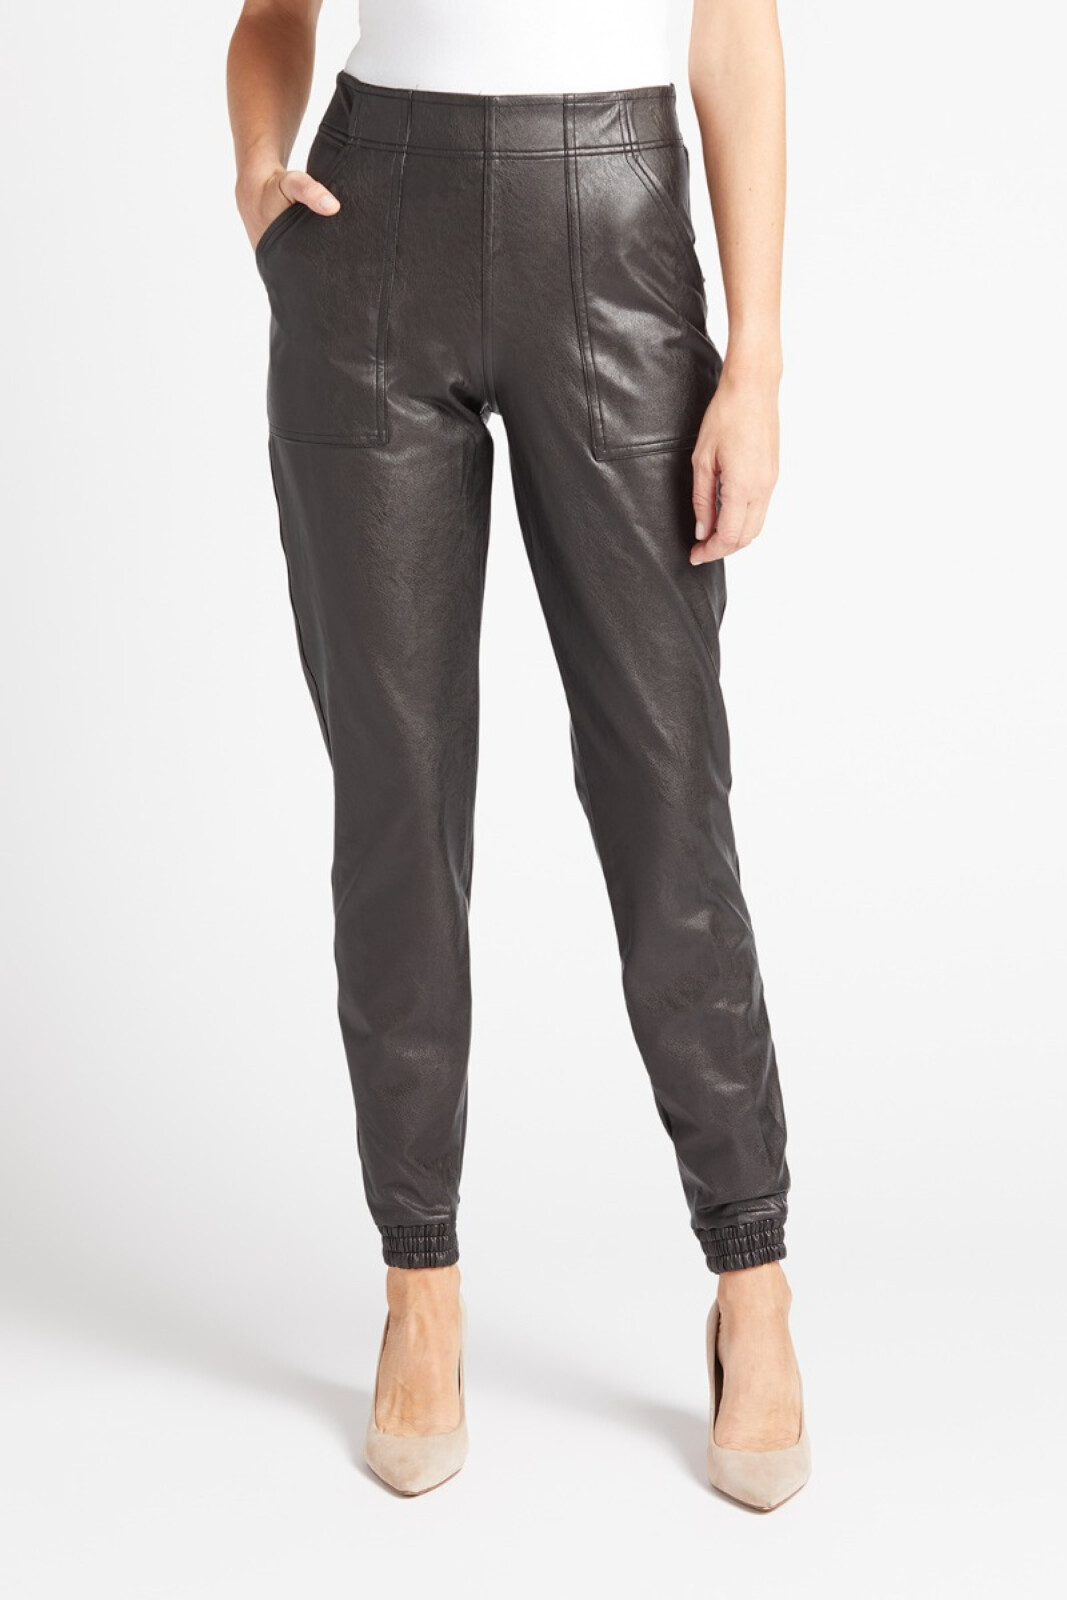 SPANX Women's Leather Like Joggers